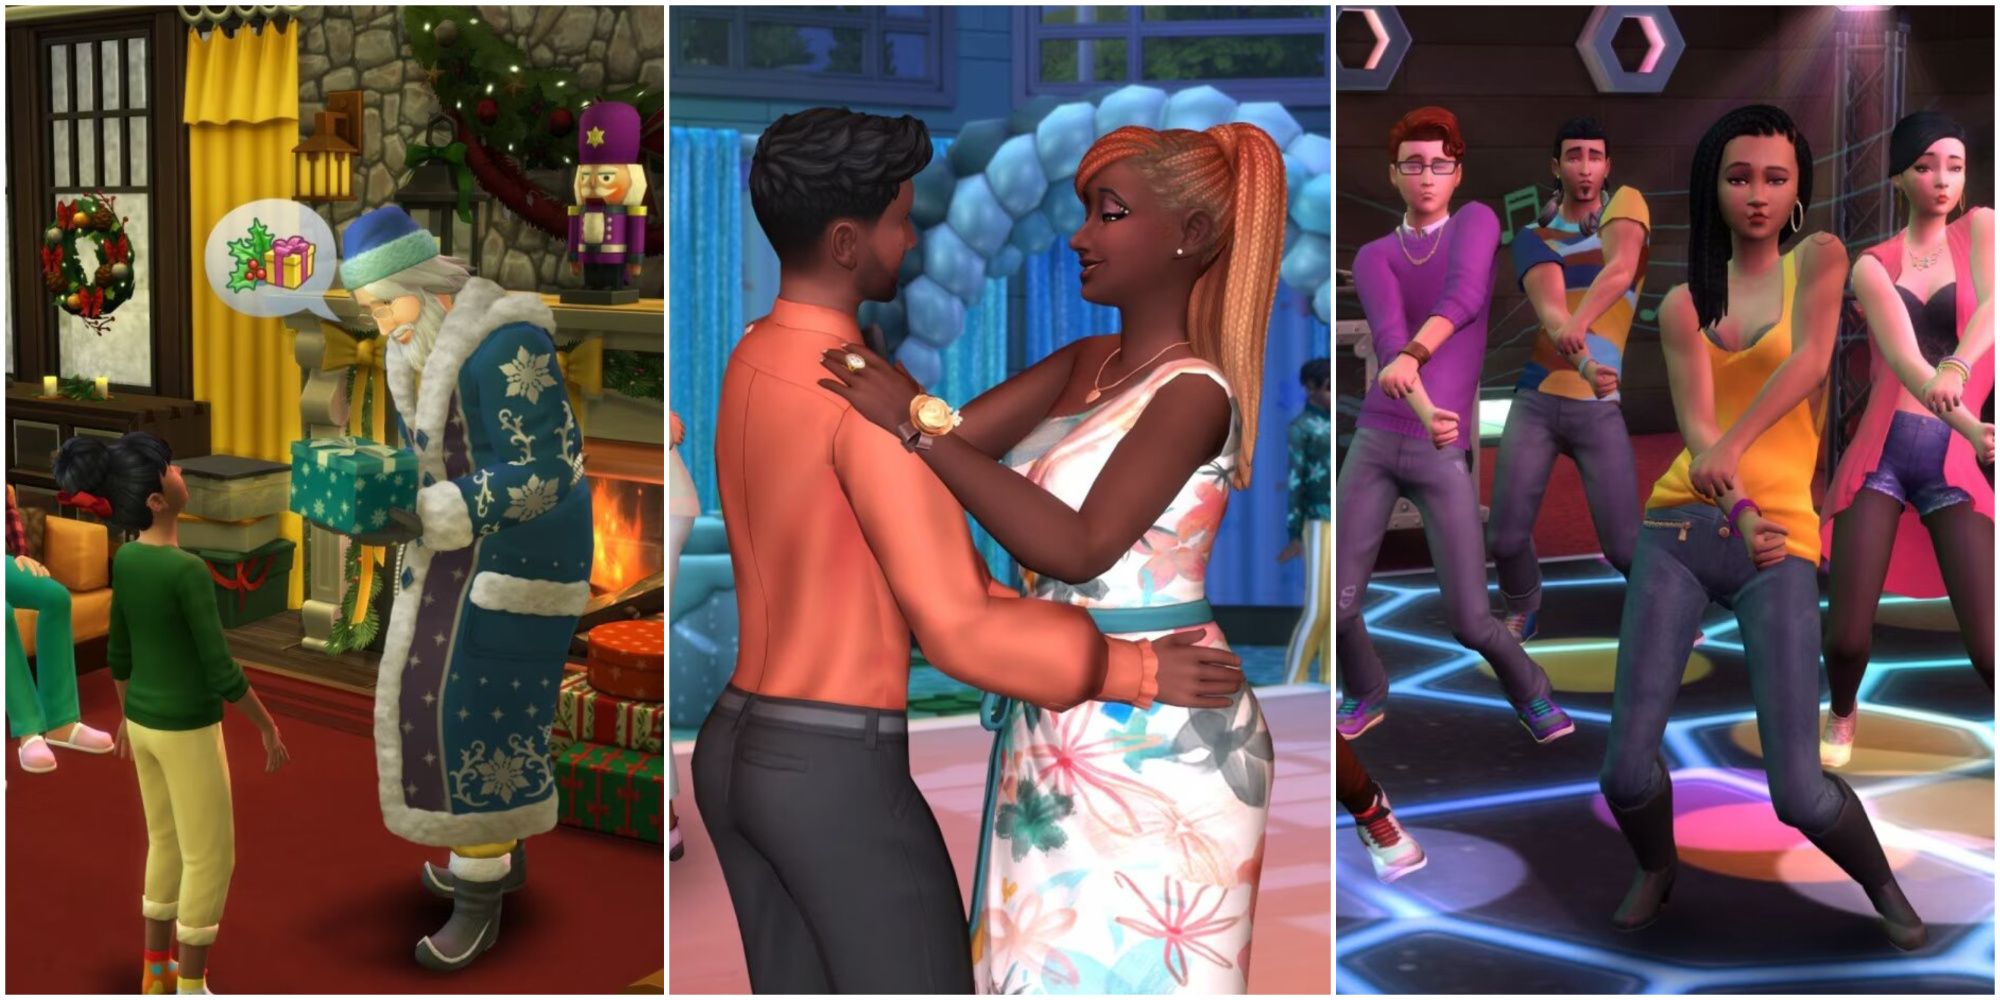 A split image showing three images of Sims, Father Winter giving a gift, a couple dancing at prom, and a group dancing in a nightclub